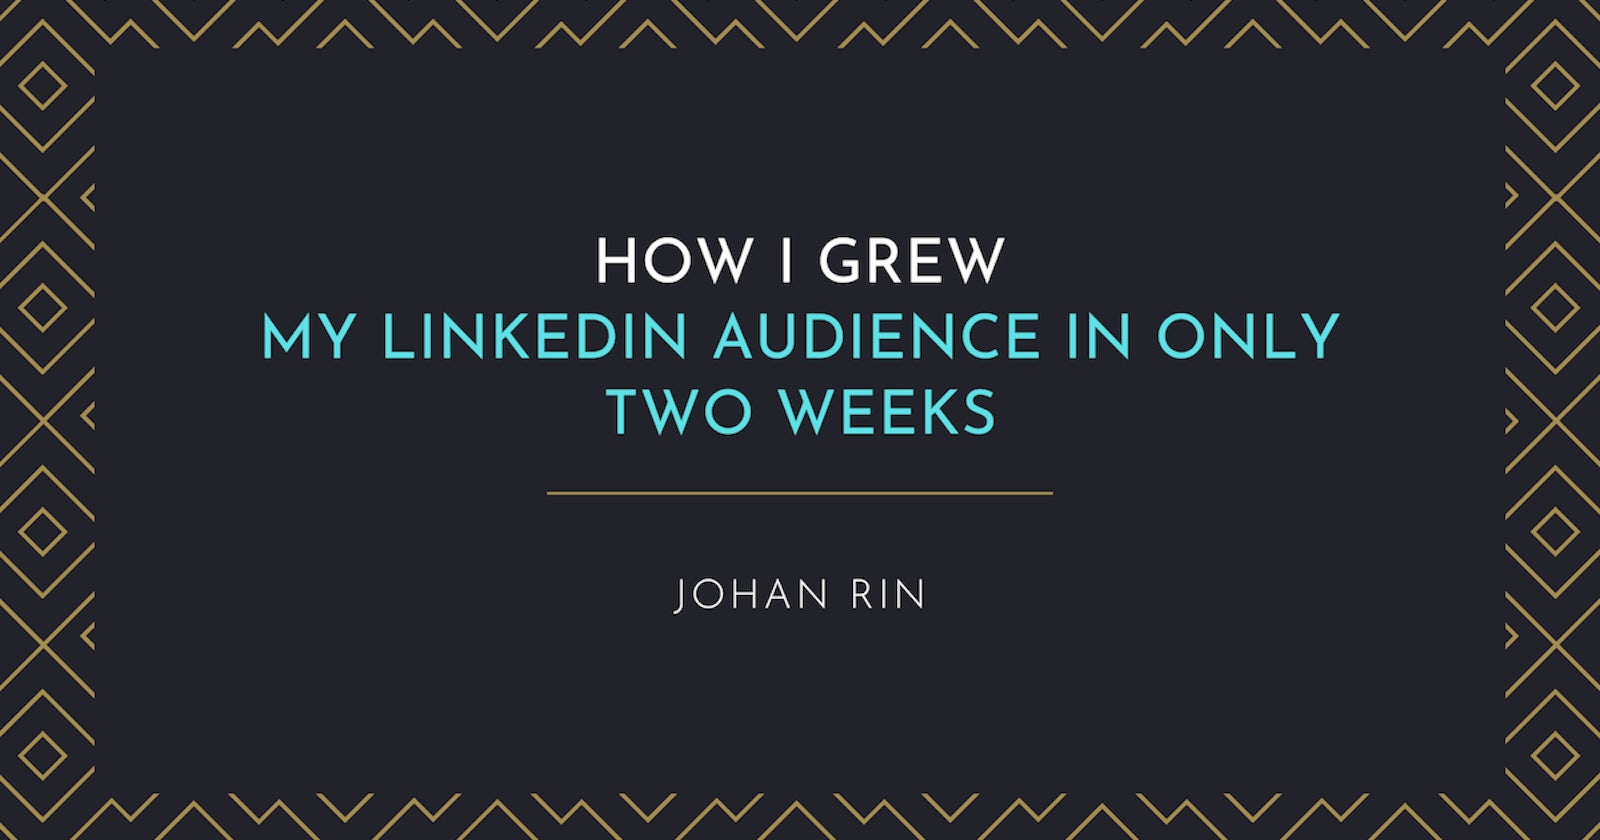 How I Grew My LinkedIn Audience In Only Two Weeks